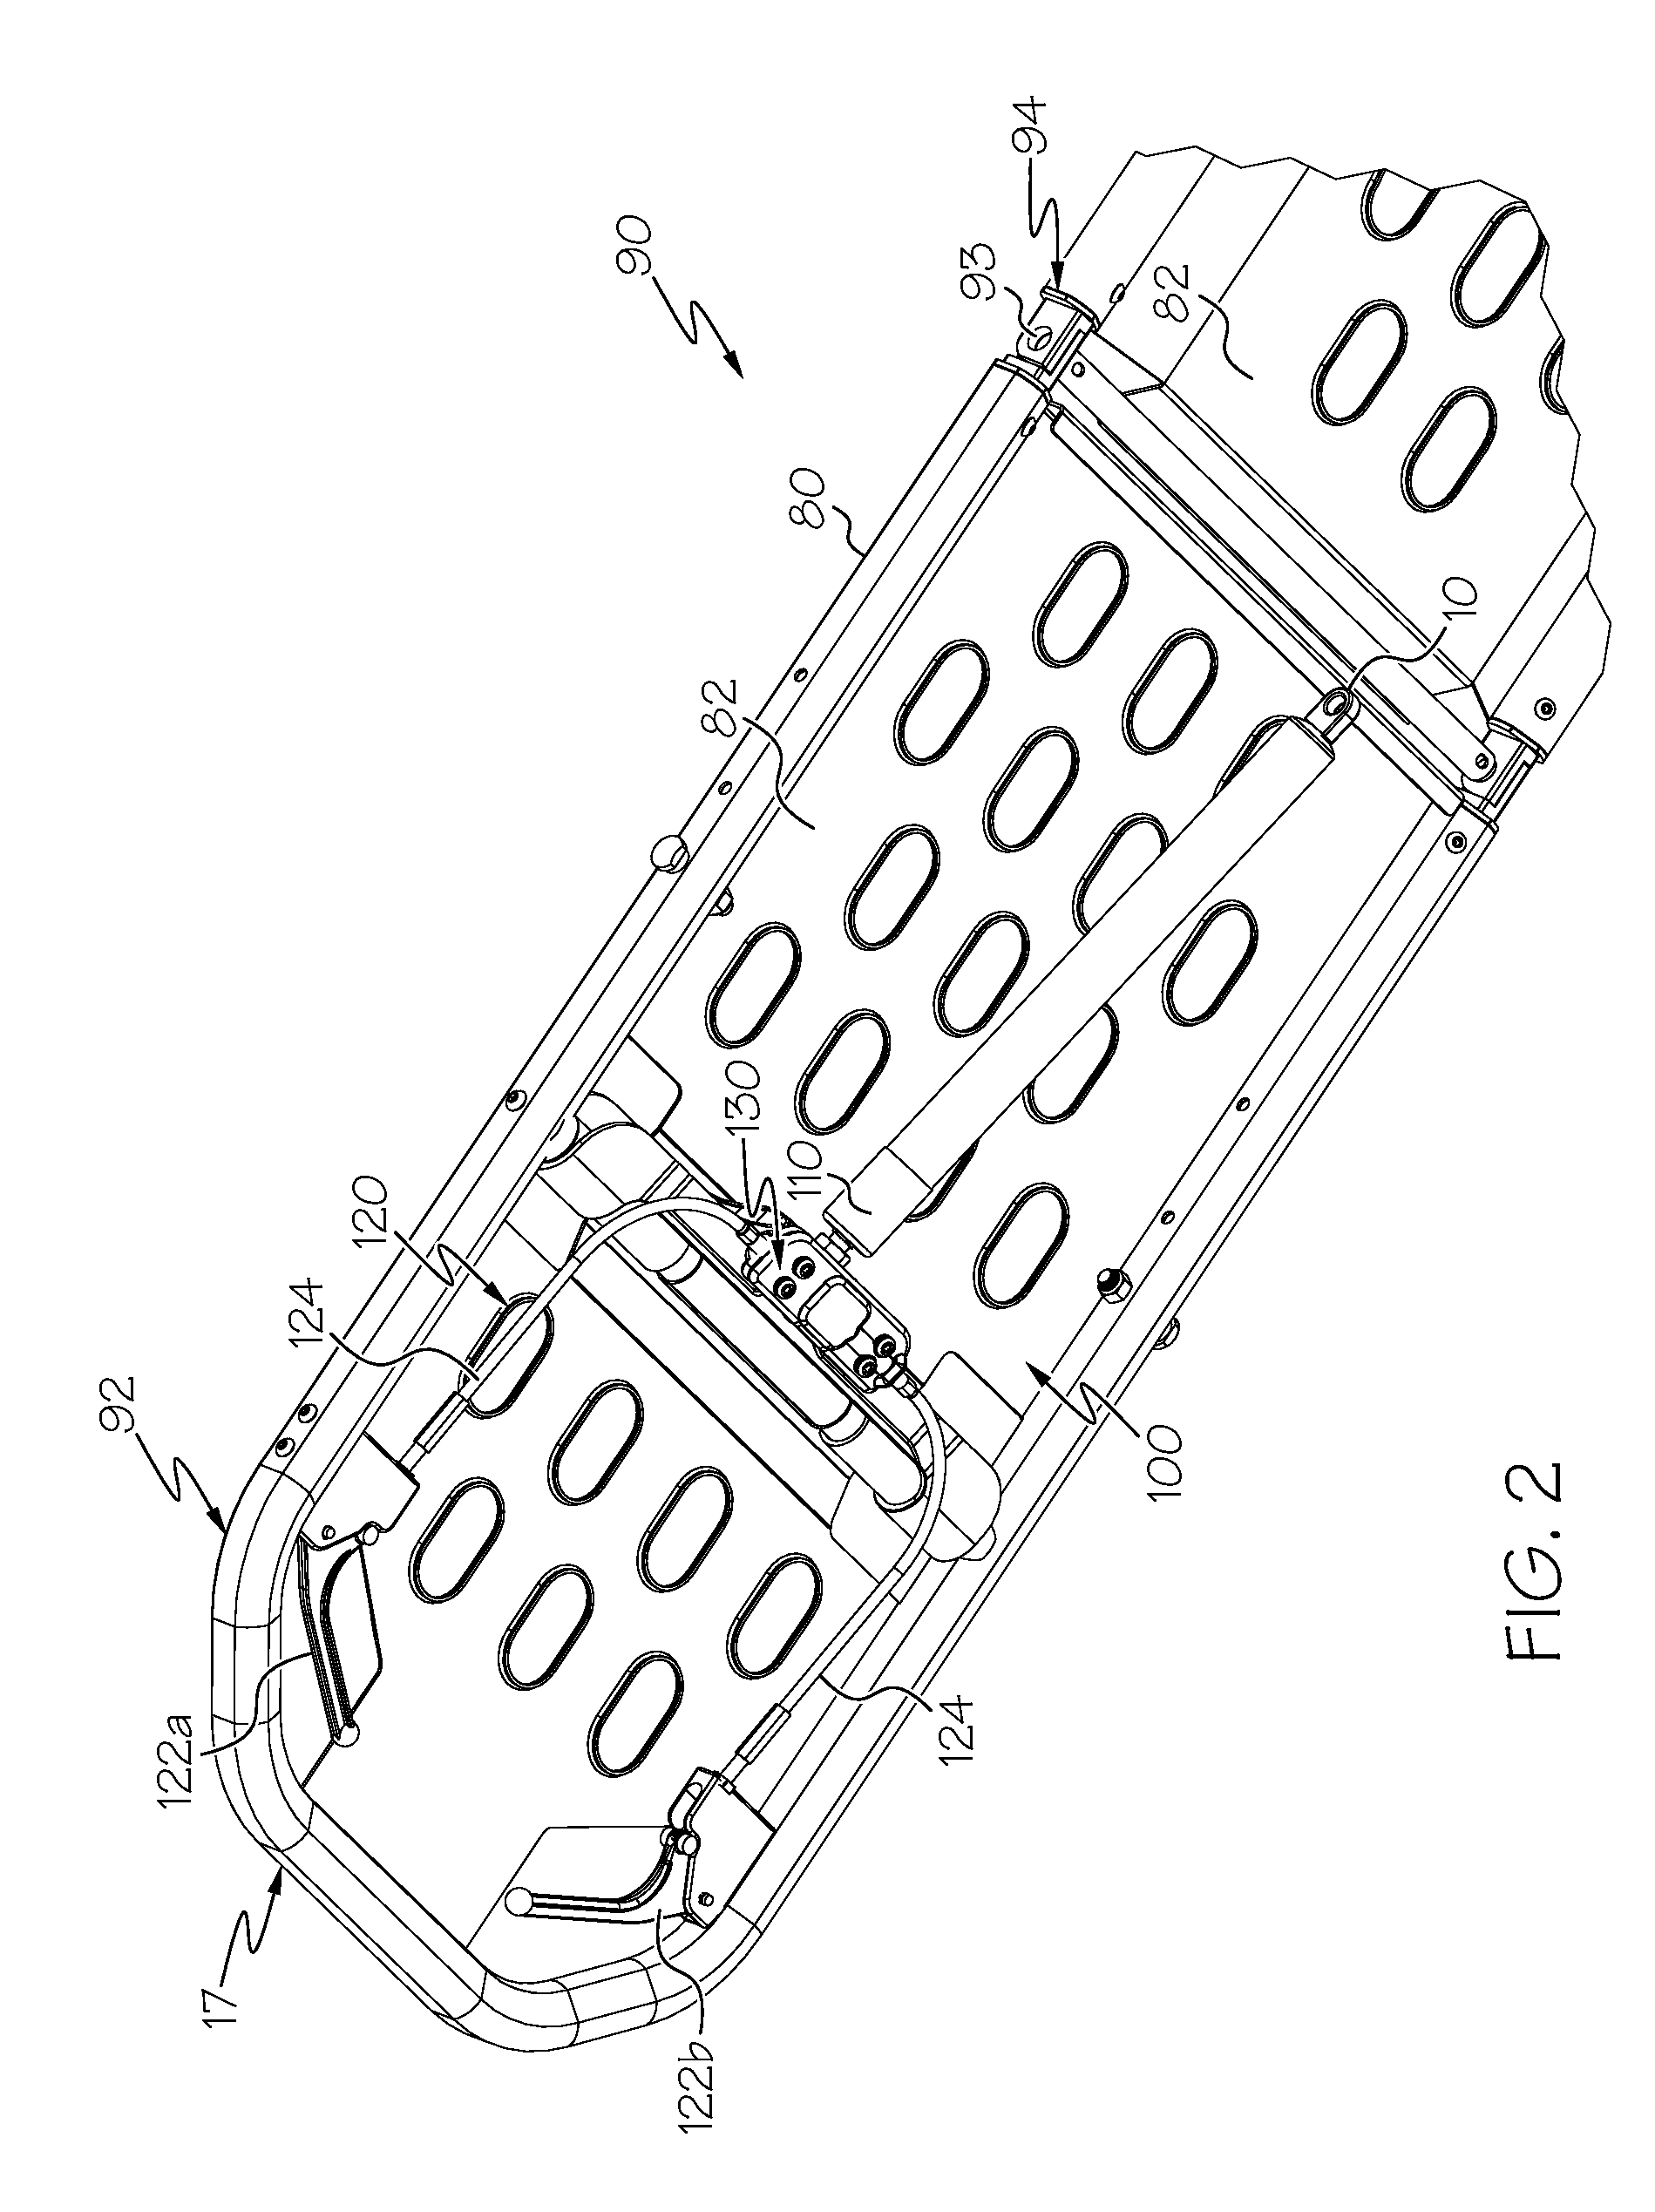 Assisted lifting devices for roll-in-cots